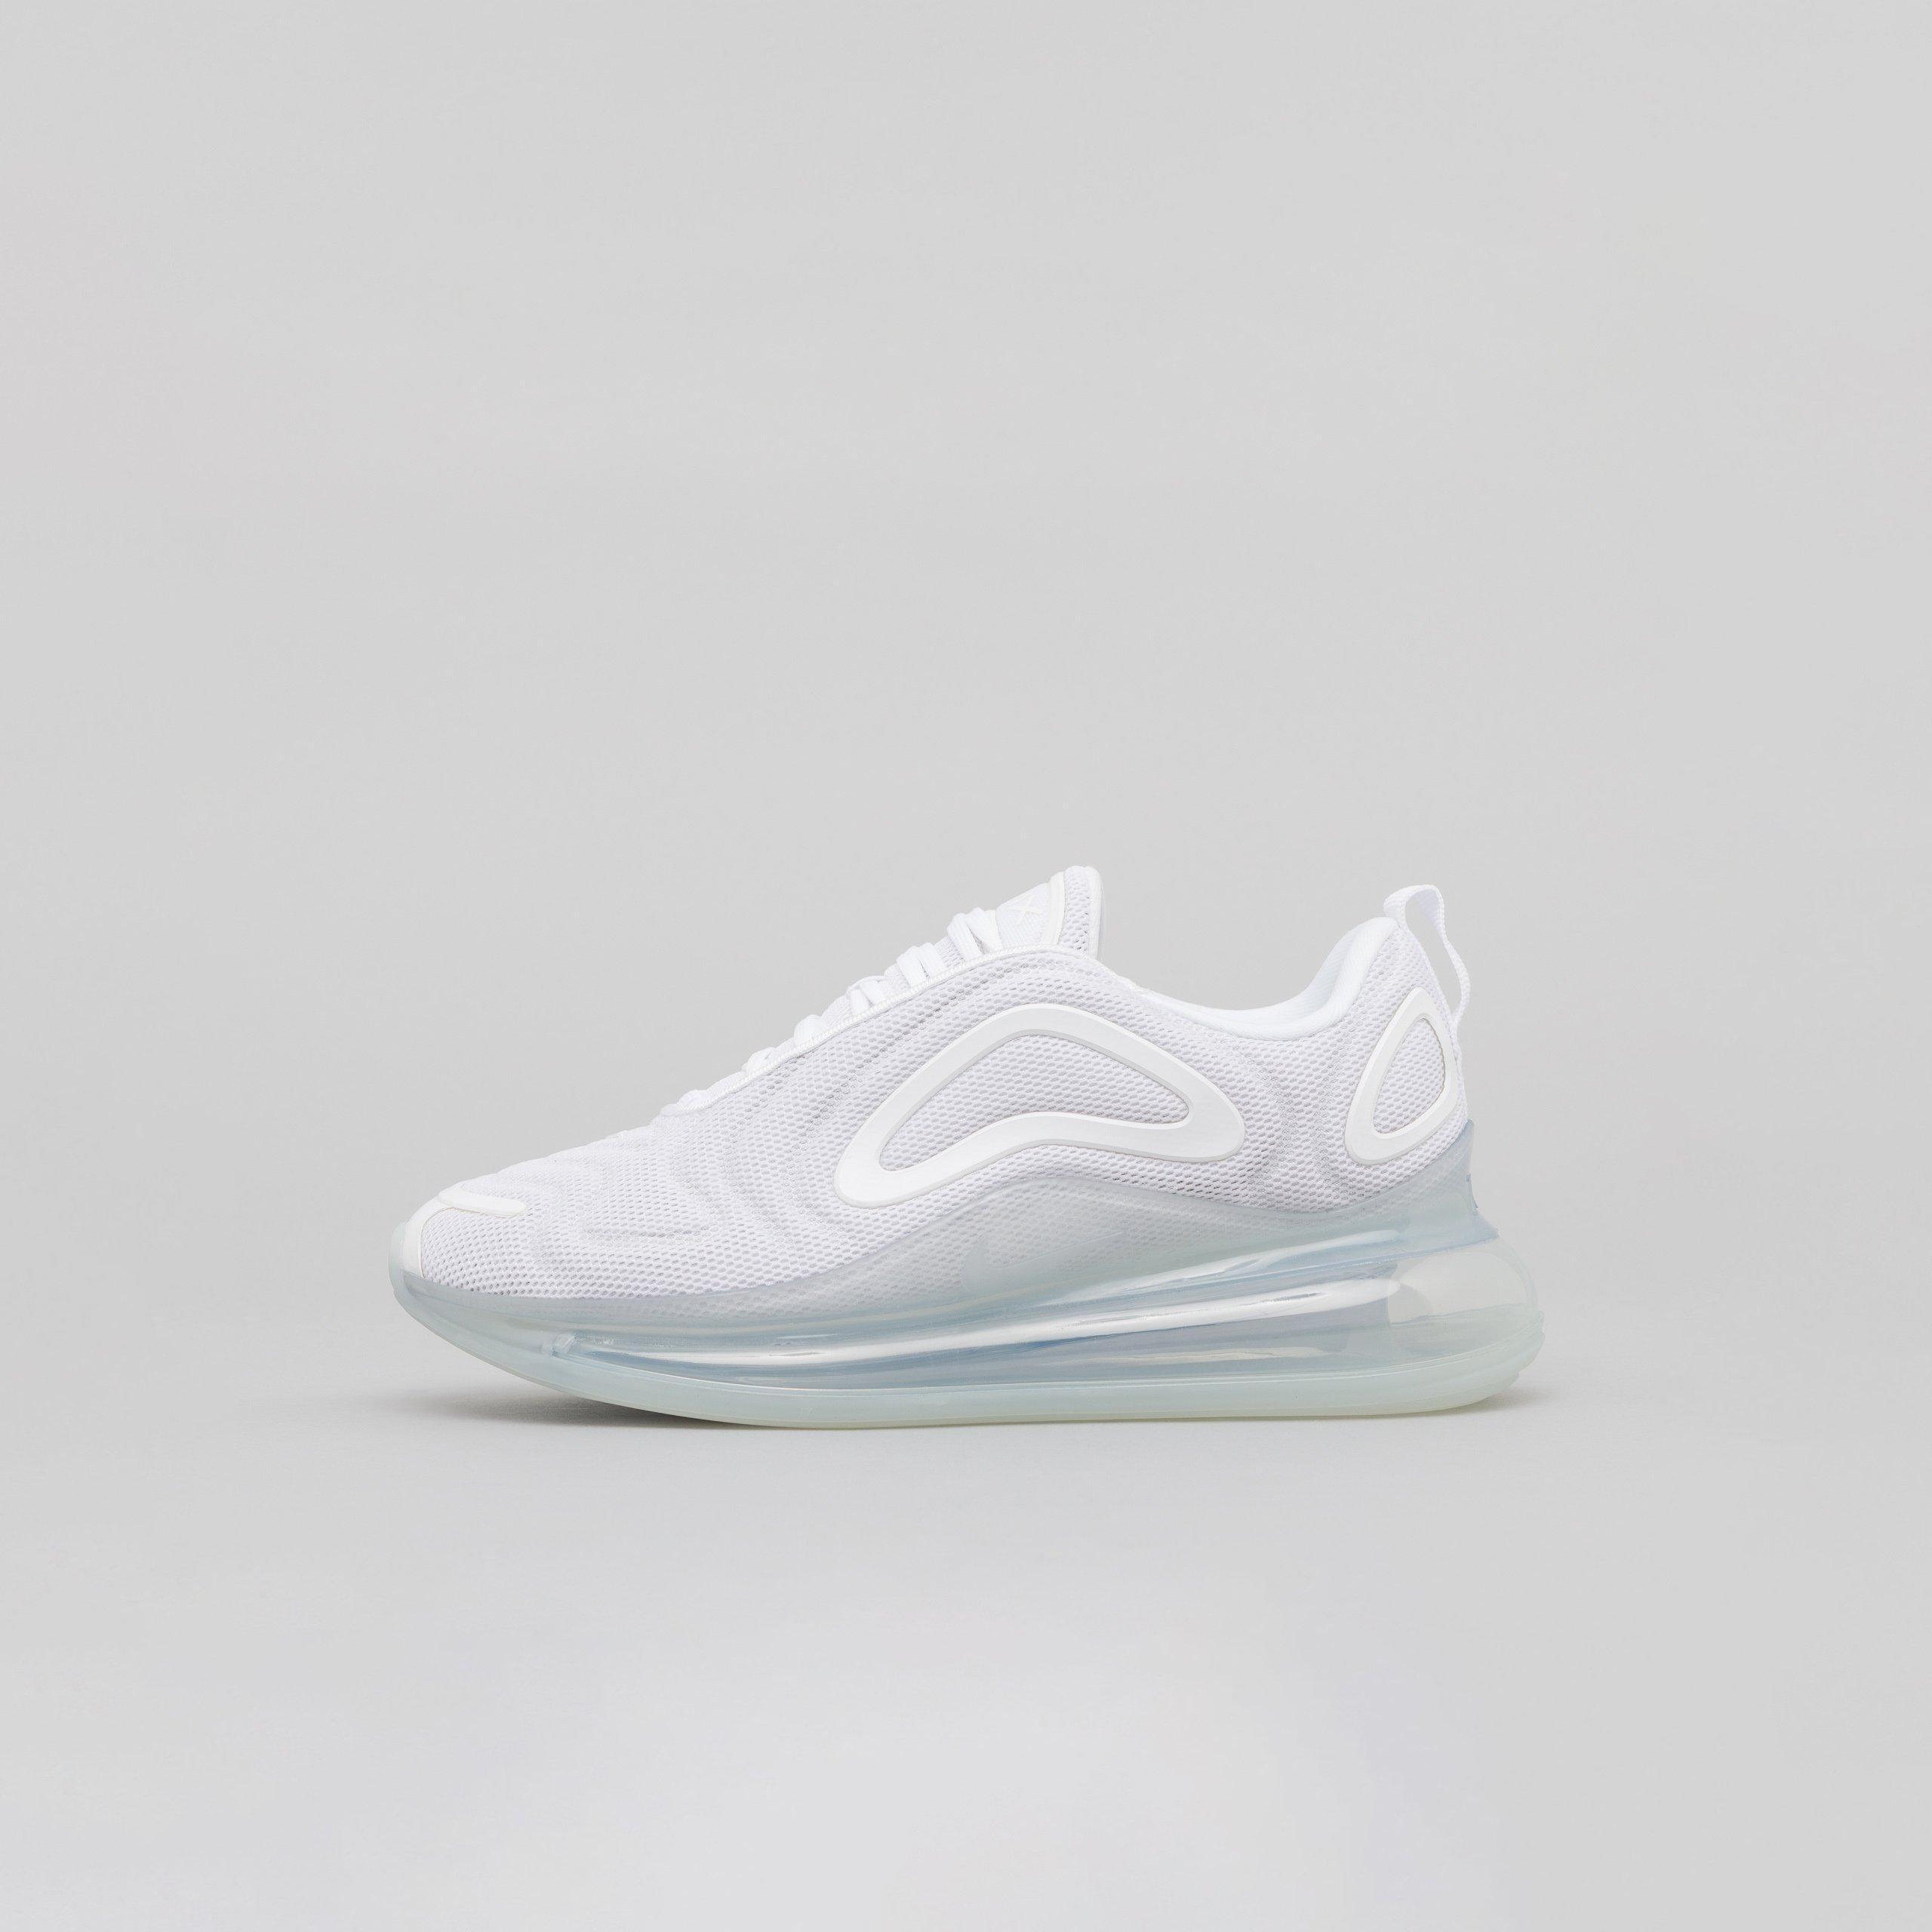 Nike Synthetic Air Max 720 - Shoes in White,Metallic Platinum,White (White)  for Men | Lyst